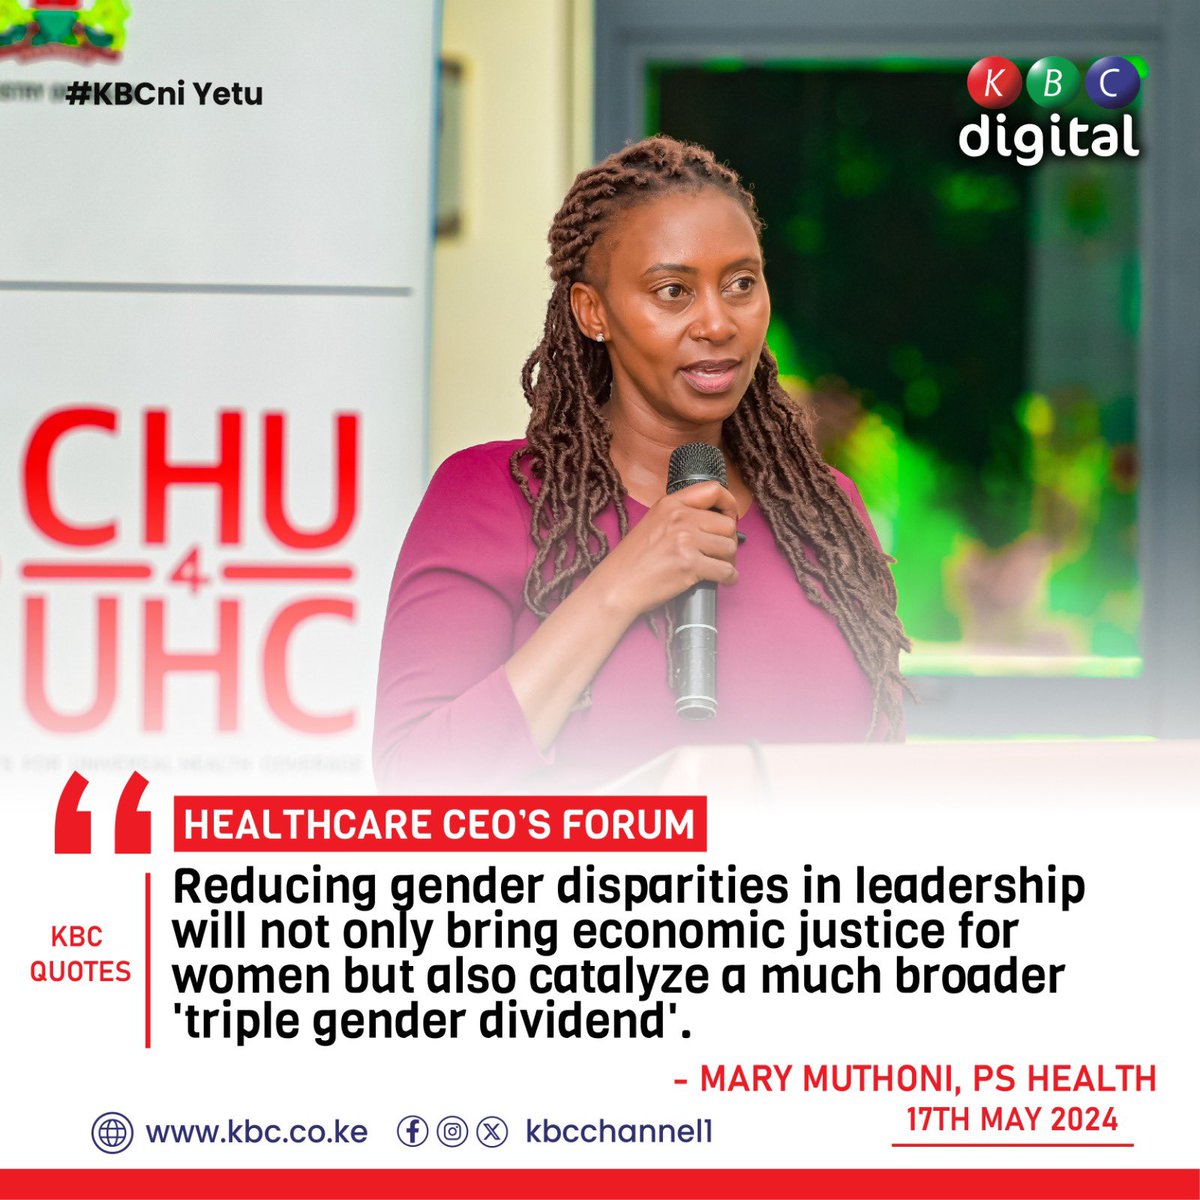 'Reducing gender disparities in leadership will not only bring economic justice for women but also catalyze a much broader 'triple gender dividend'. - PS Health Mary Muthoni #KBCniYetu